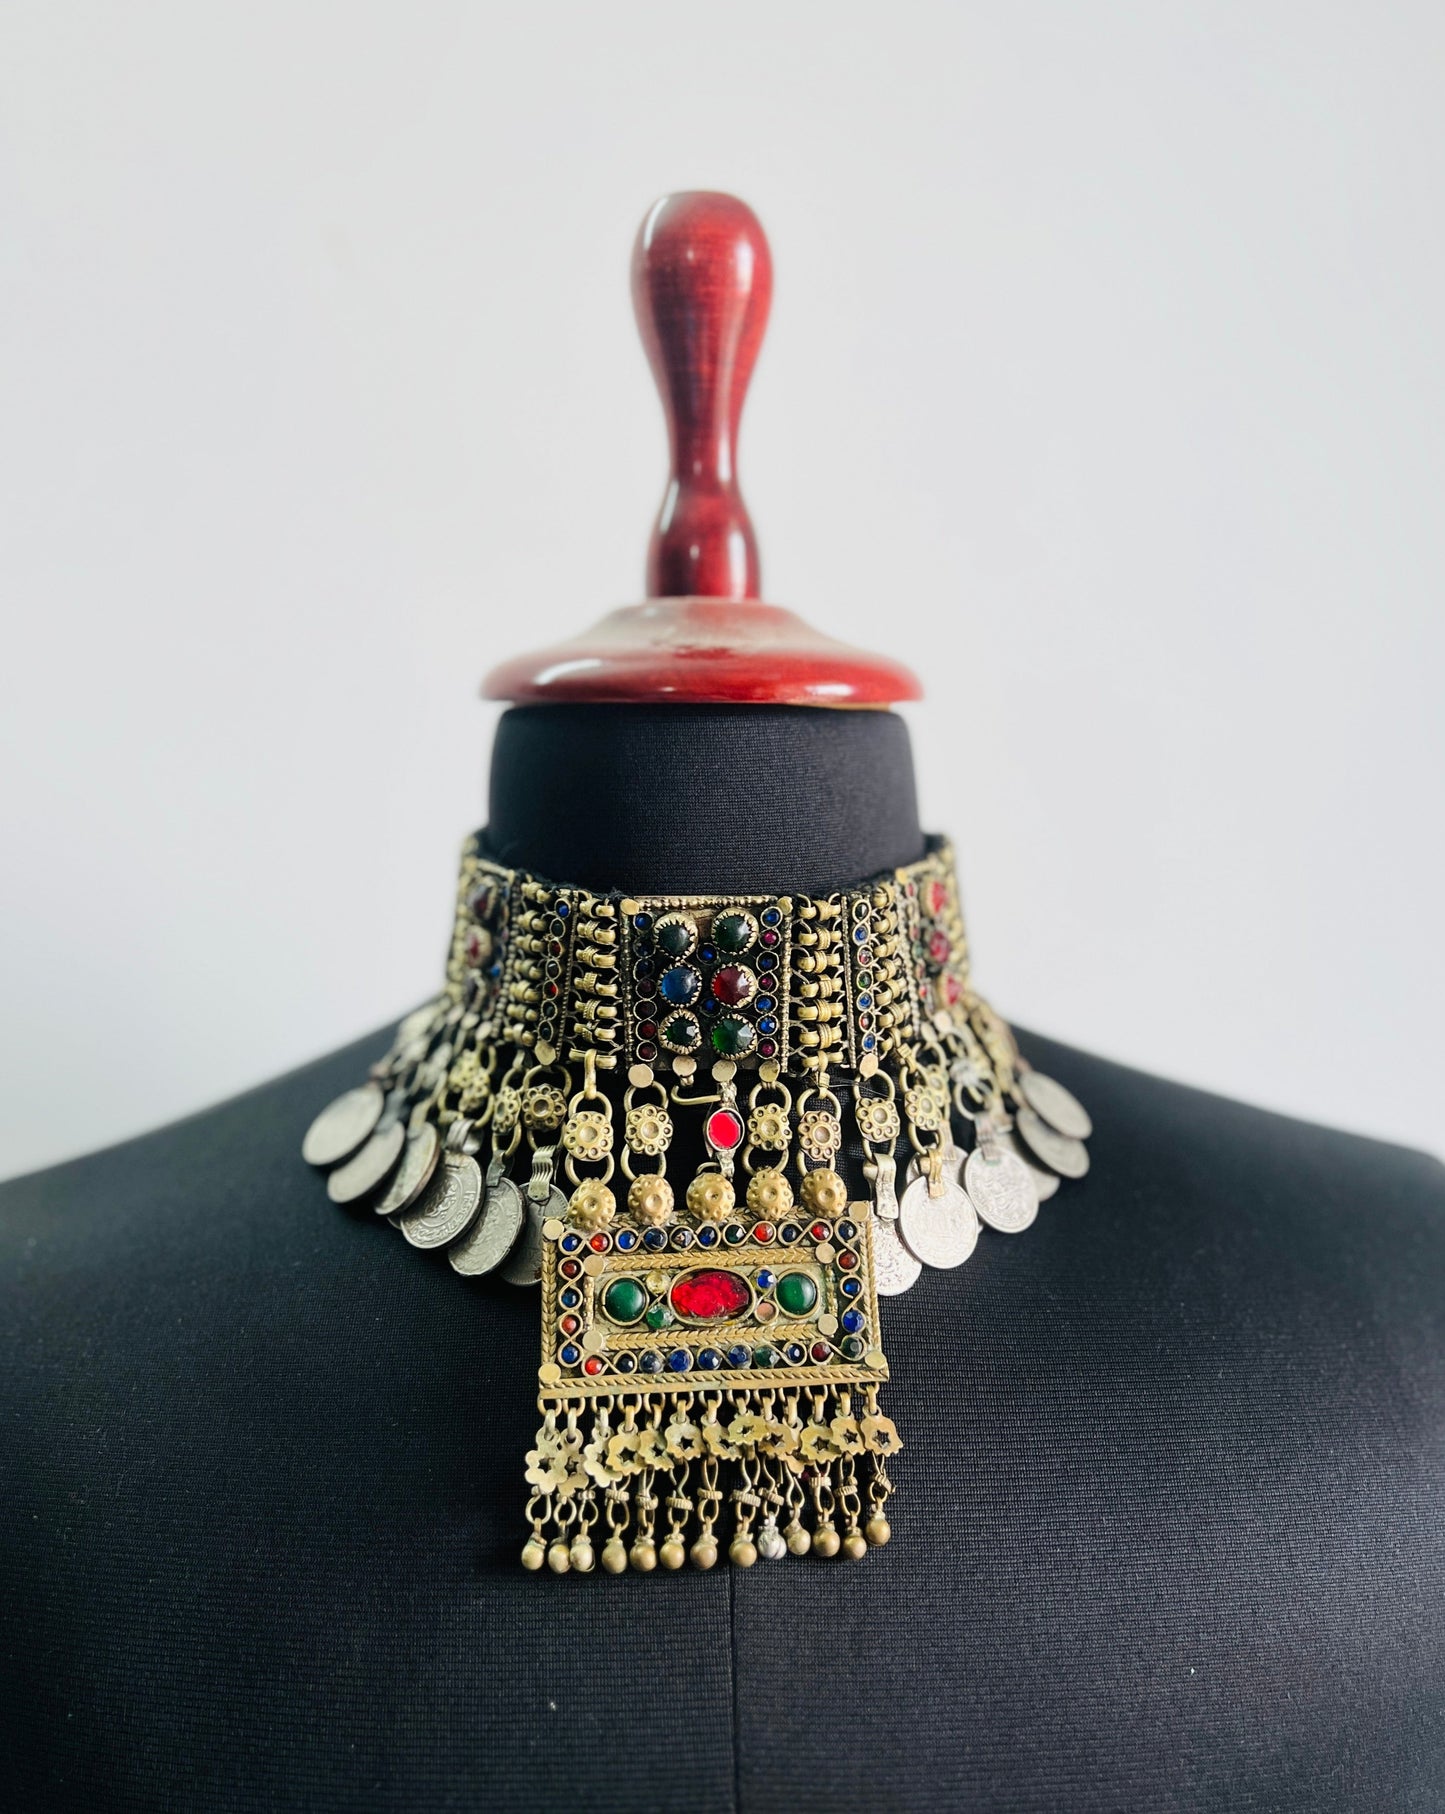 Beshumar Afghan Necklace